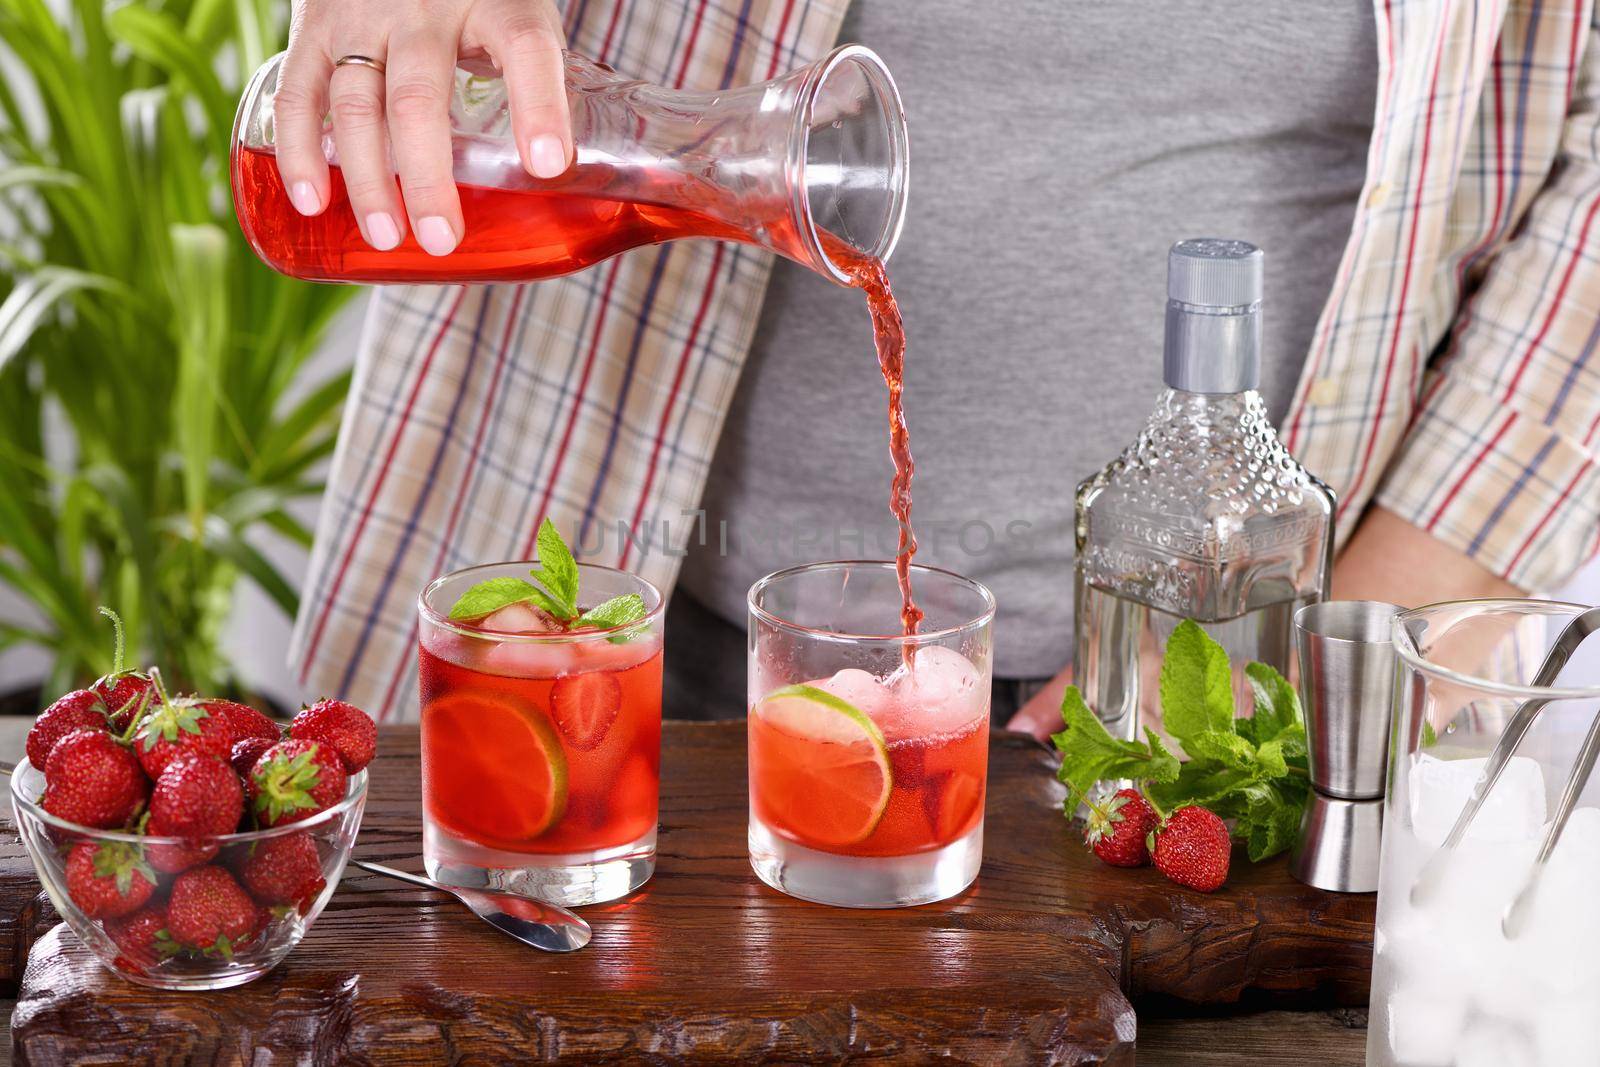 The bartender prepares a refreshing strawberry mojito cocktail with ice, fresh mint and lime. Great idea for a picnic or summer party. It may contain alcohol or be a mocktail.